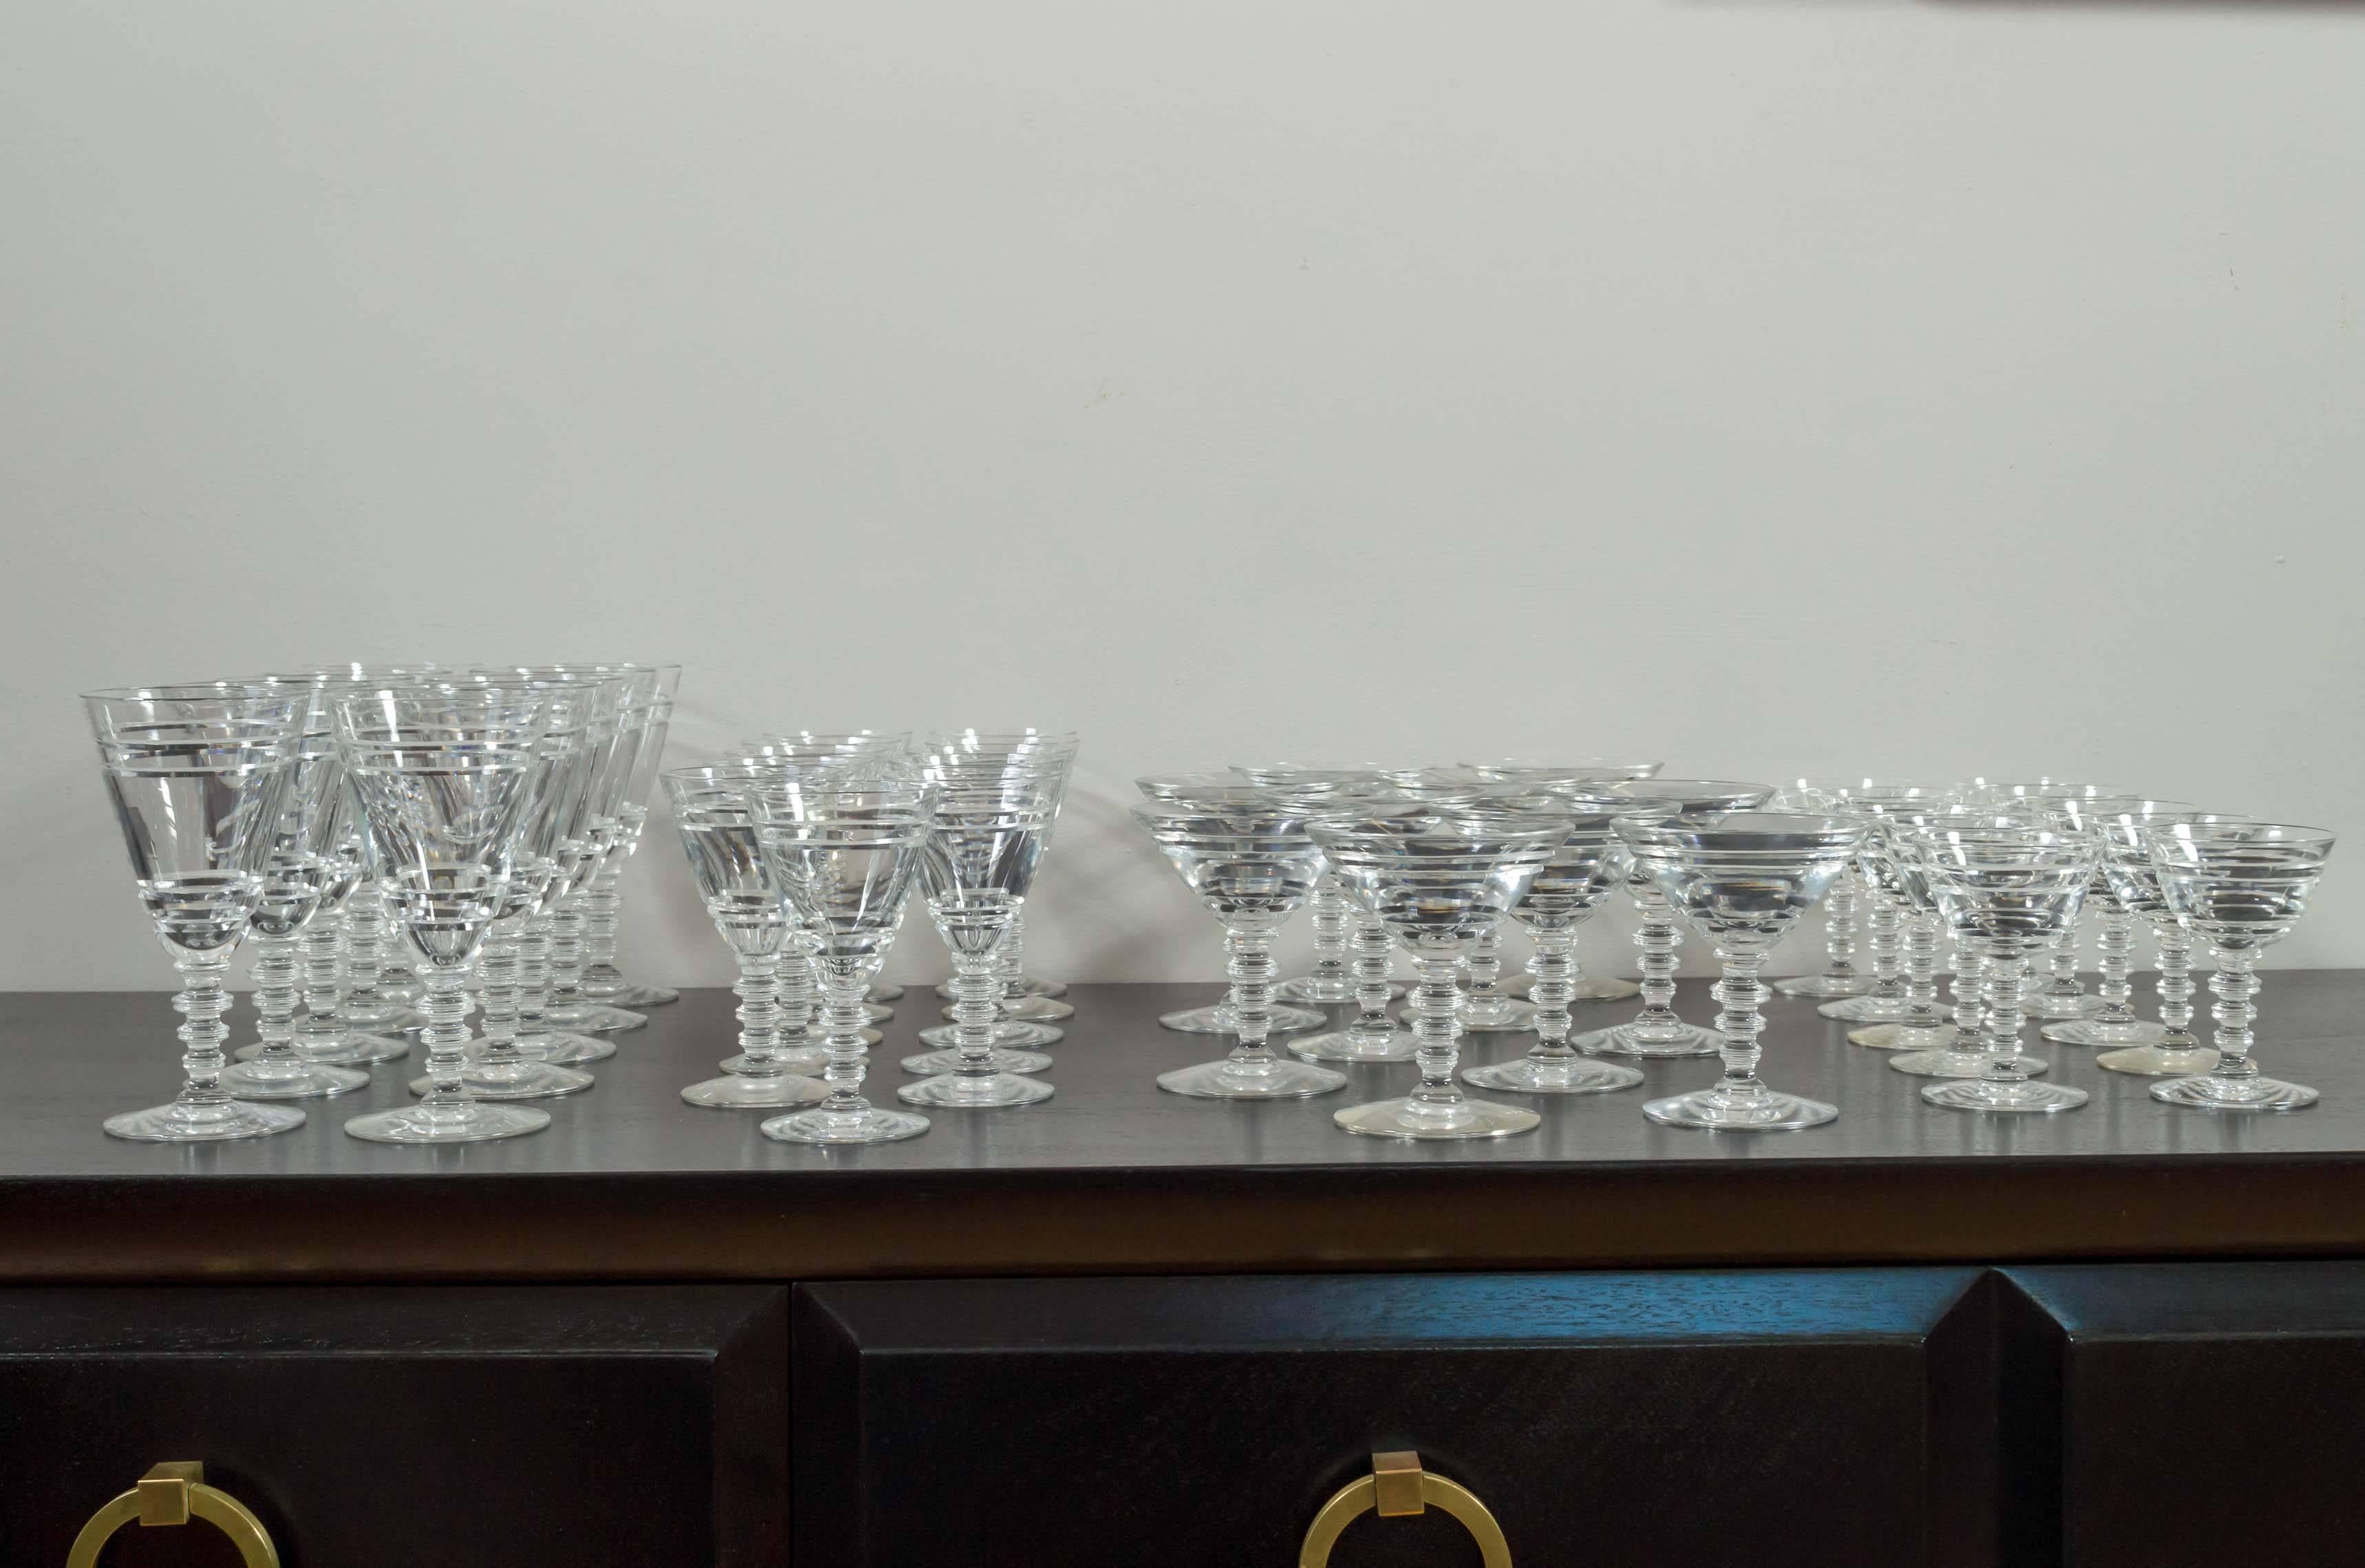 A sparkling service-for-ten set of Art Deco-era stemware, expertly crafted from Steuben lead crystal blanks by T.G. Hawkes & Co., the preeminent American producer of the finest cut-glass of the time. 

The concentric simplicity of their design